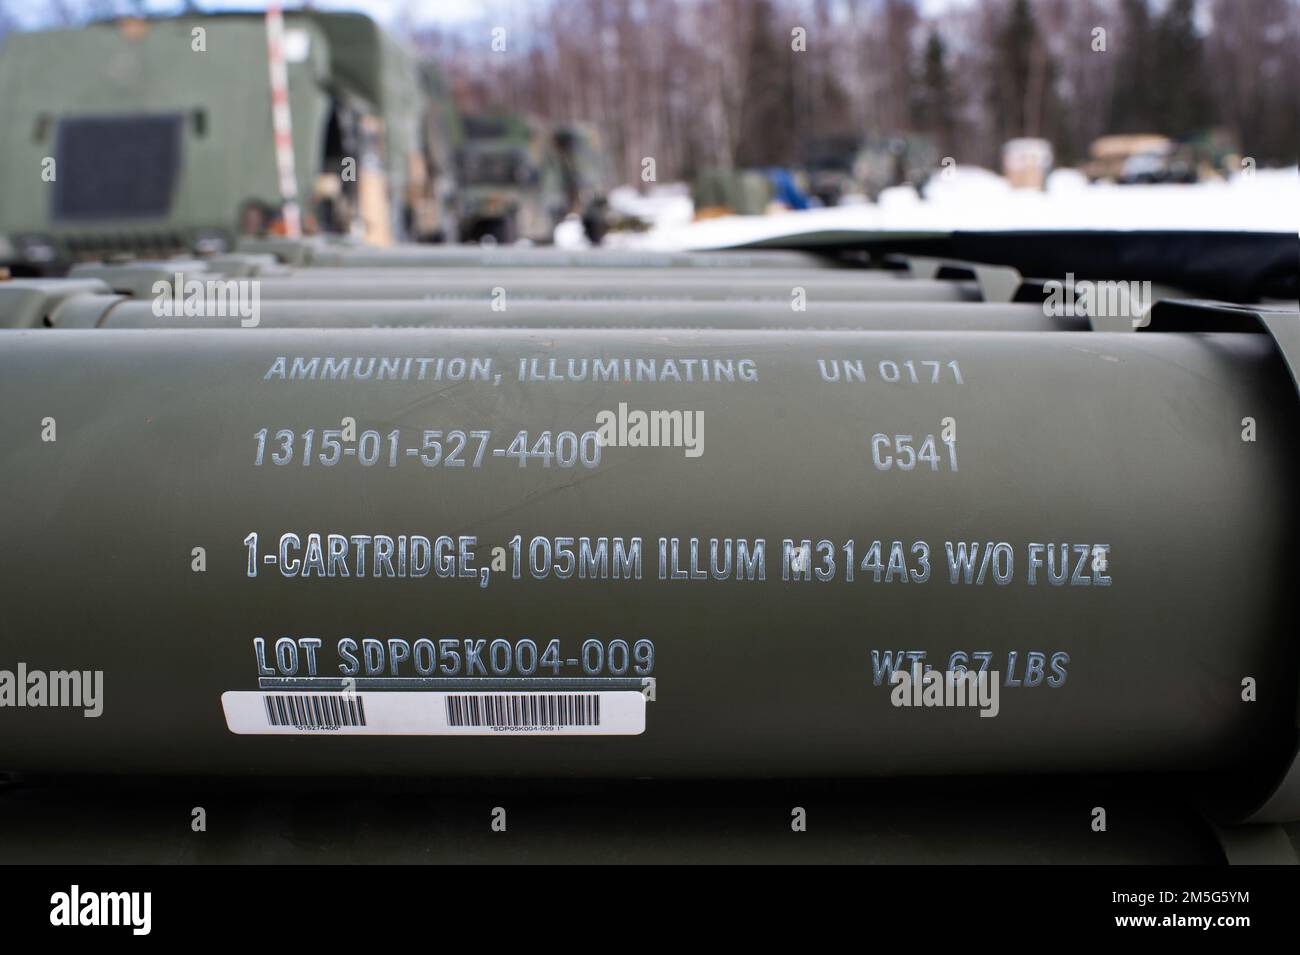 Ammunition for M119 105 mm howitzers is staged for U.S. Army paratroopers assigned to Bravo Battery, 2nd Battalion, 377th Parachute Field Artillery Regiment, 4th Infantry Brigade Combat Team (Airborne), 25th Infantry Division, as they conduct live-fire artillery training at Joint Base Elmendorf-Richardson, Alaska, March 16, 2022. The Soldiers of 4/25 belong to the only American airborne brigade in the Pacific and are trained to execute airborne maneuvers in extreme cold weather and high altitude environments in support of combat, partnership and disaster relief operations. Stock Photo